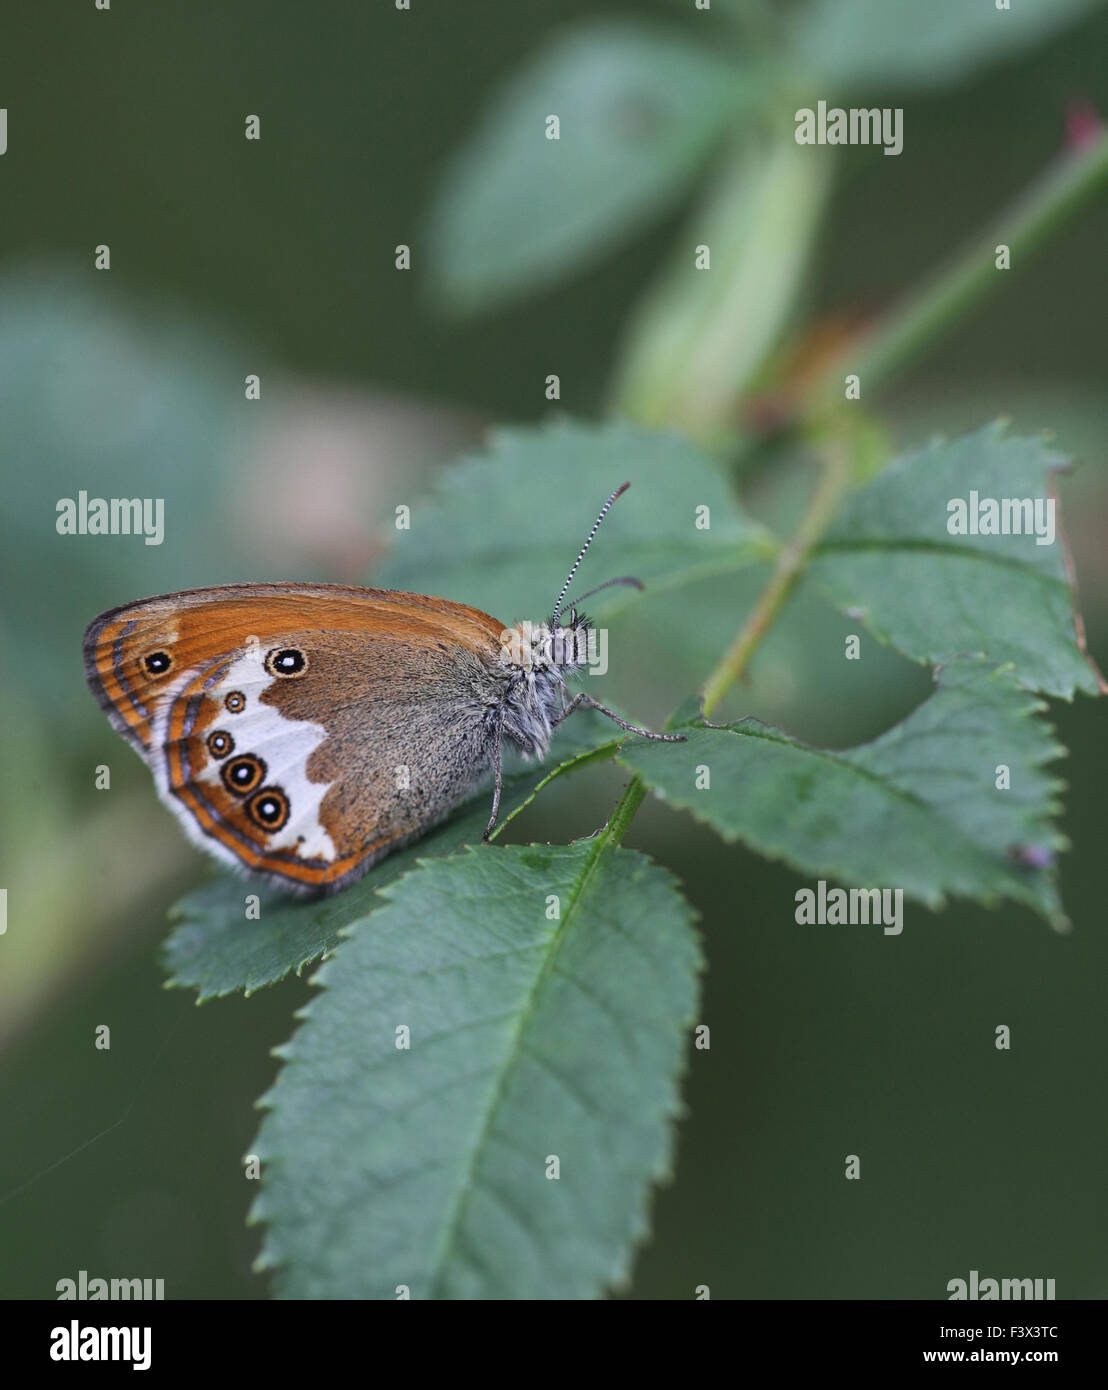 Pearly heath At rest on bramble leaf Hungary June 2015 Stock Photo